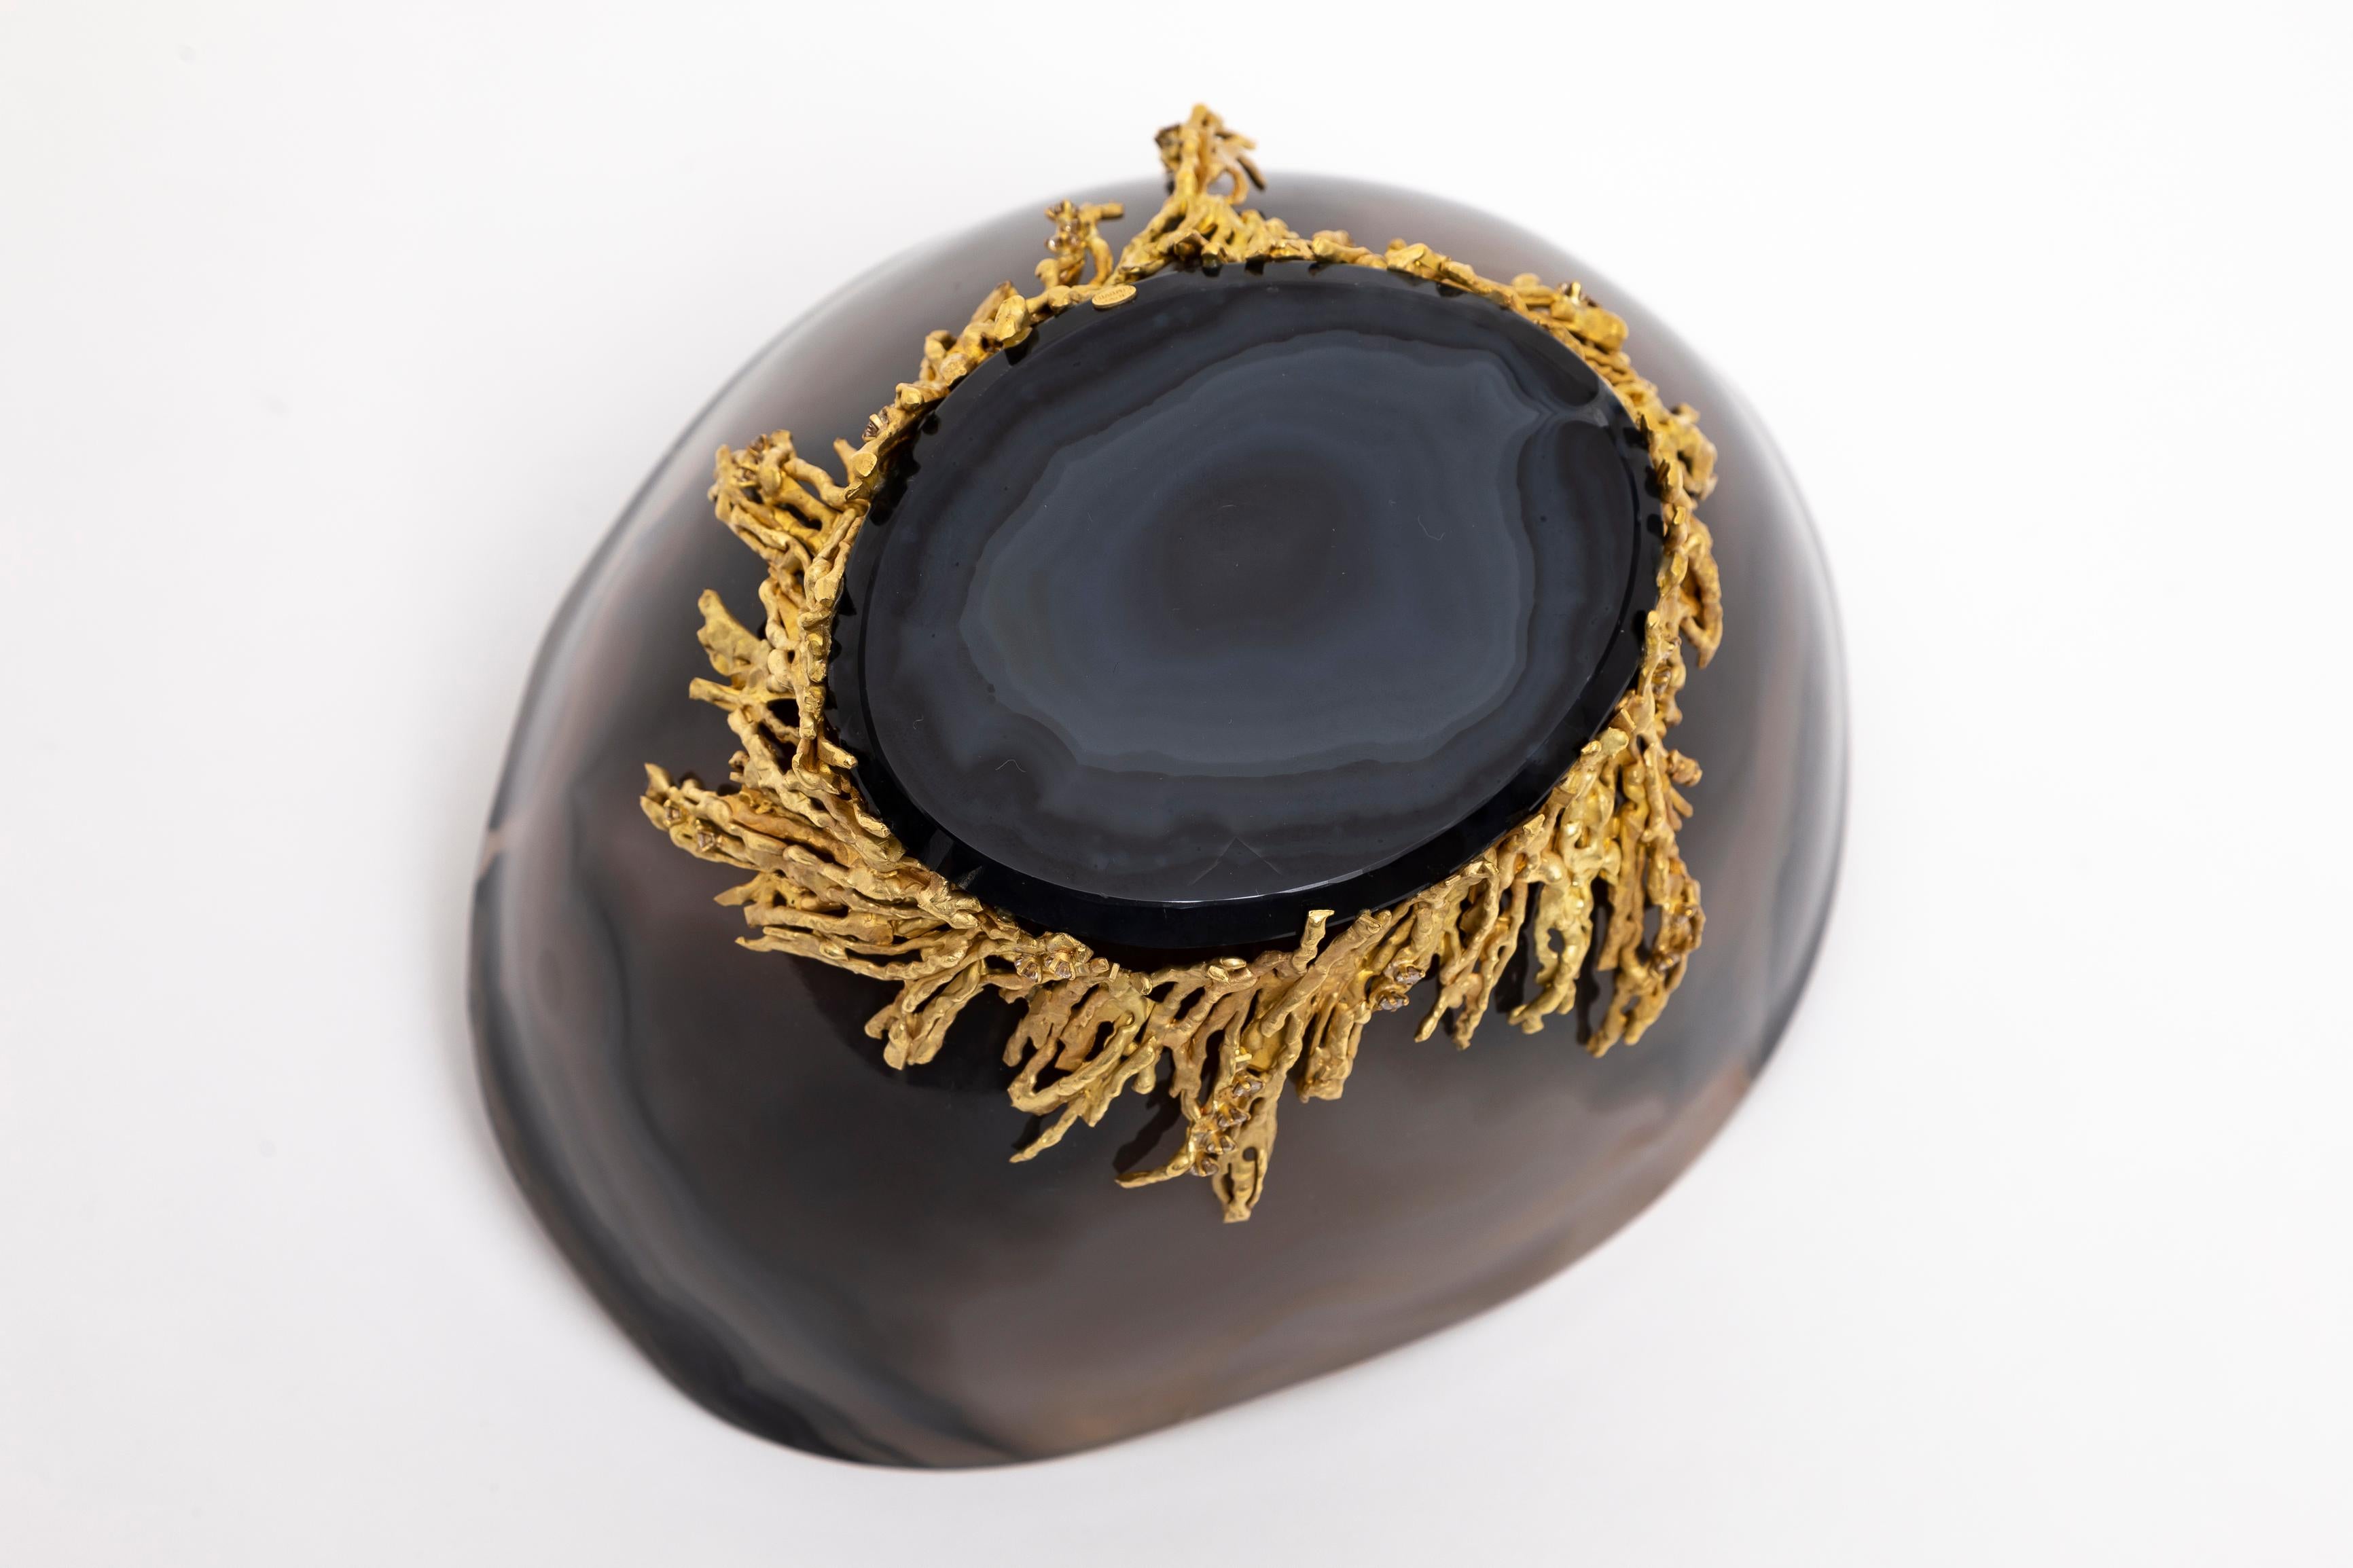 An Incredible Chaumet Paris Gold & Diamond Mounted Carved Agate Bowl For Sale 7